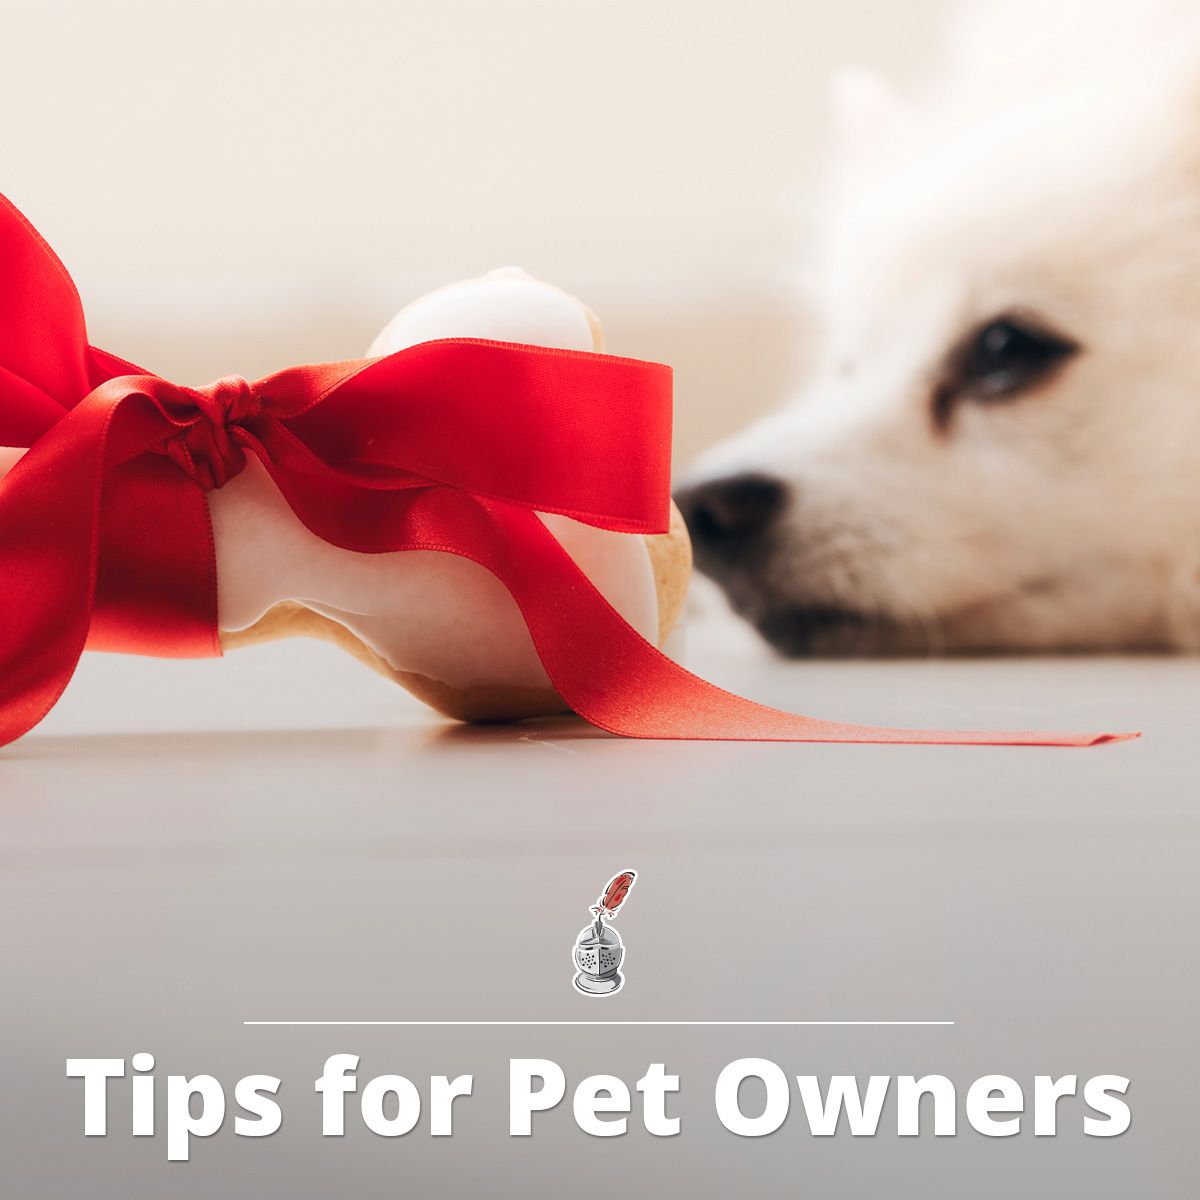 Tips for Pet Owners